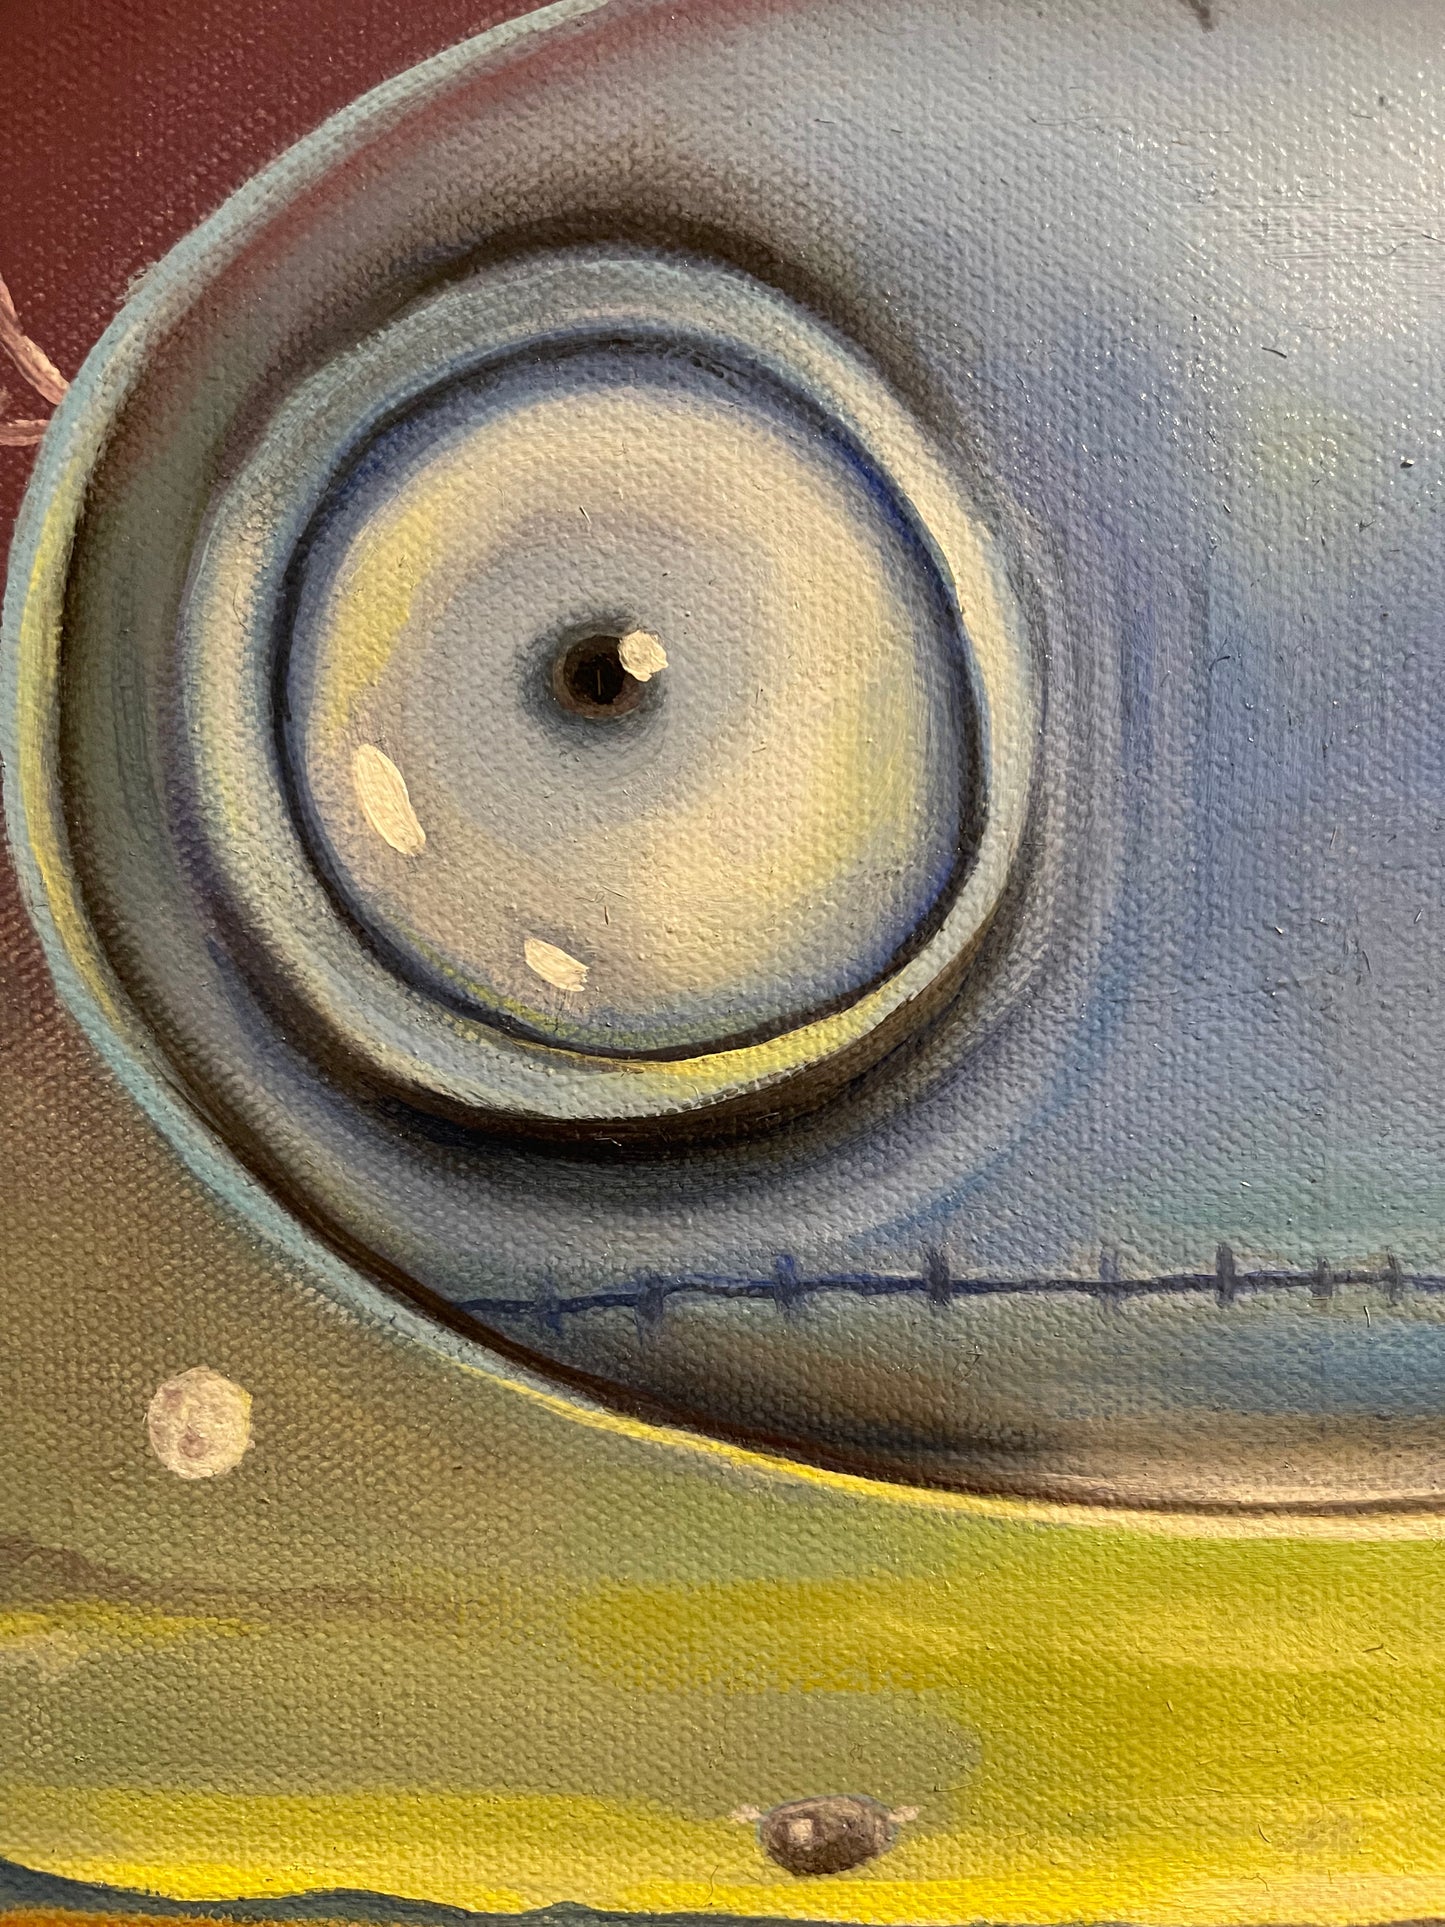 "I See You" 11in by 14in by 2in oil painting on gallery wrapped canvas.